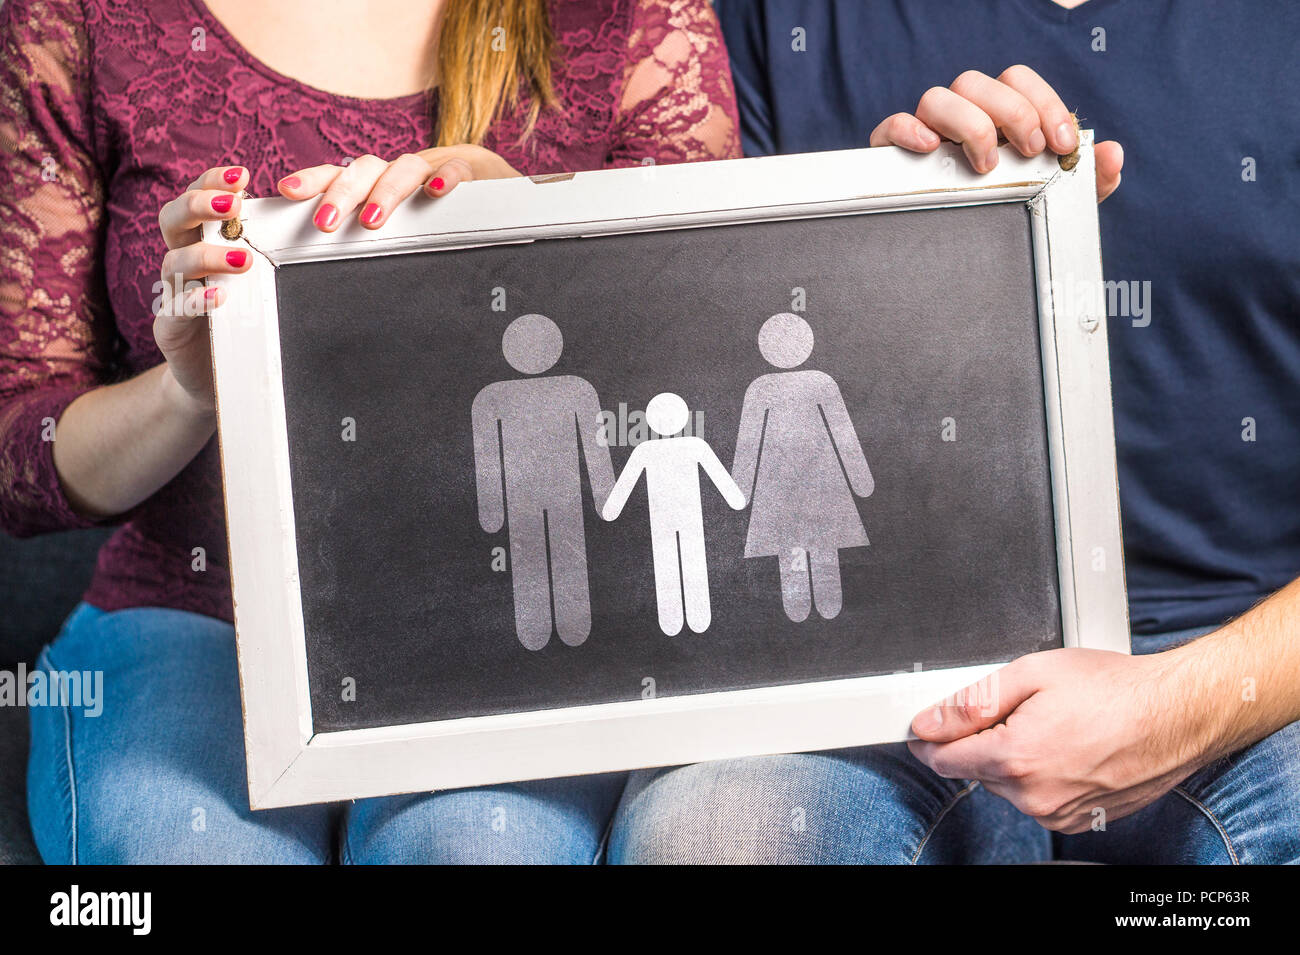 Having children, planning baby, raising kids, adoption, parenthood or infertility concept. Man and woman holding blackboard with family. Stock Photo